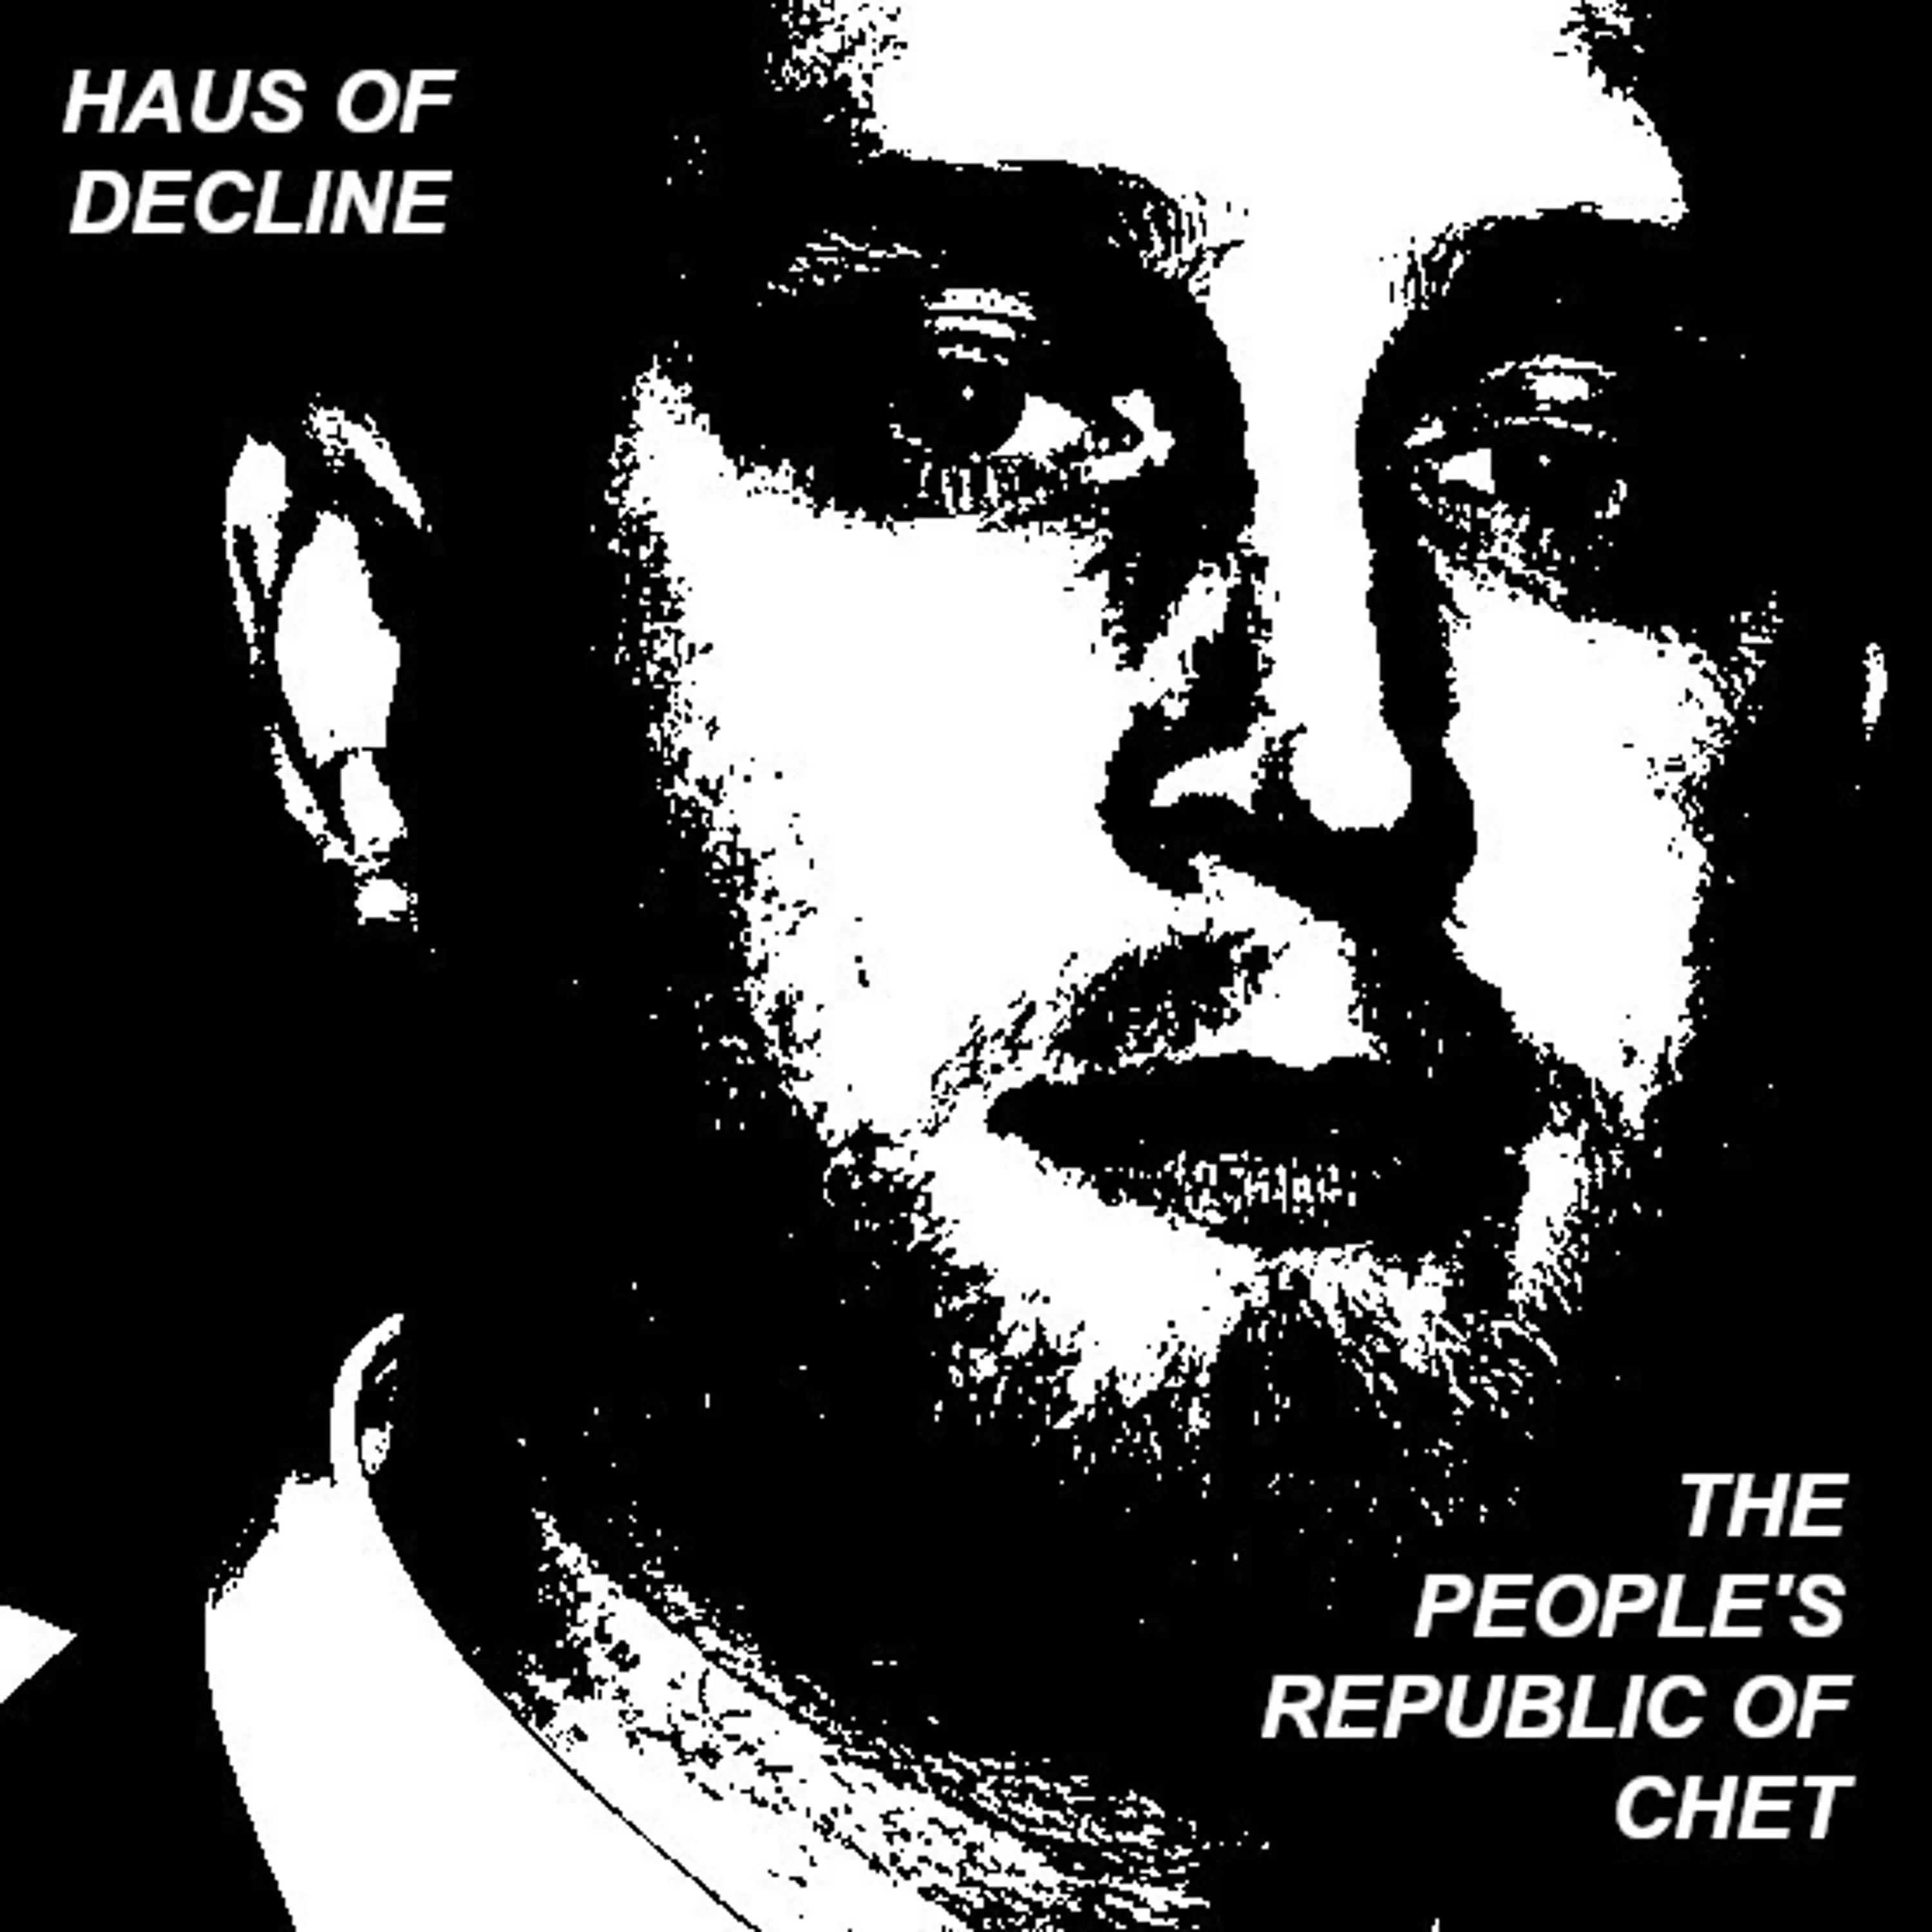 The People's Republic of Chet